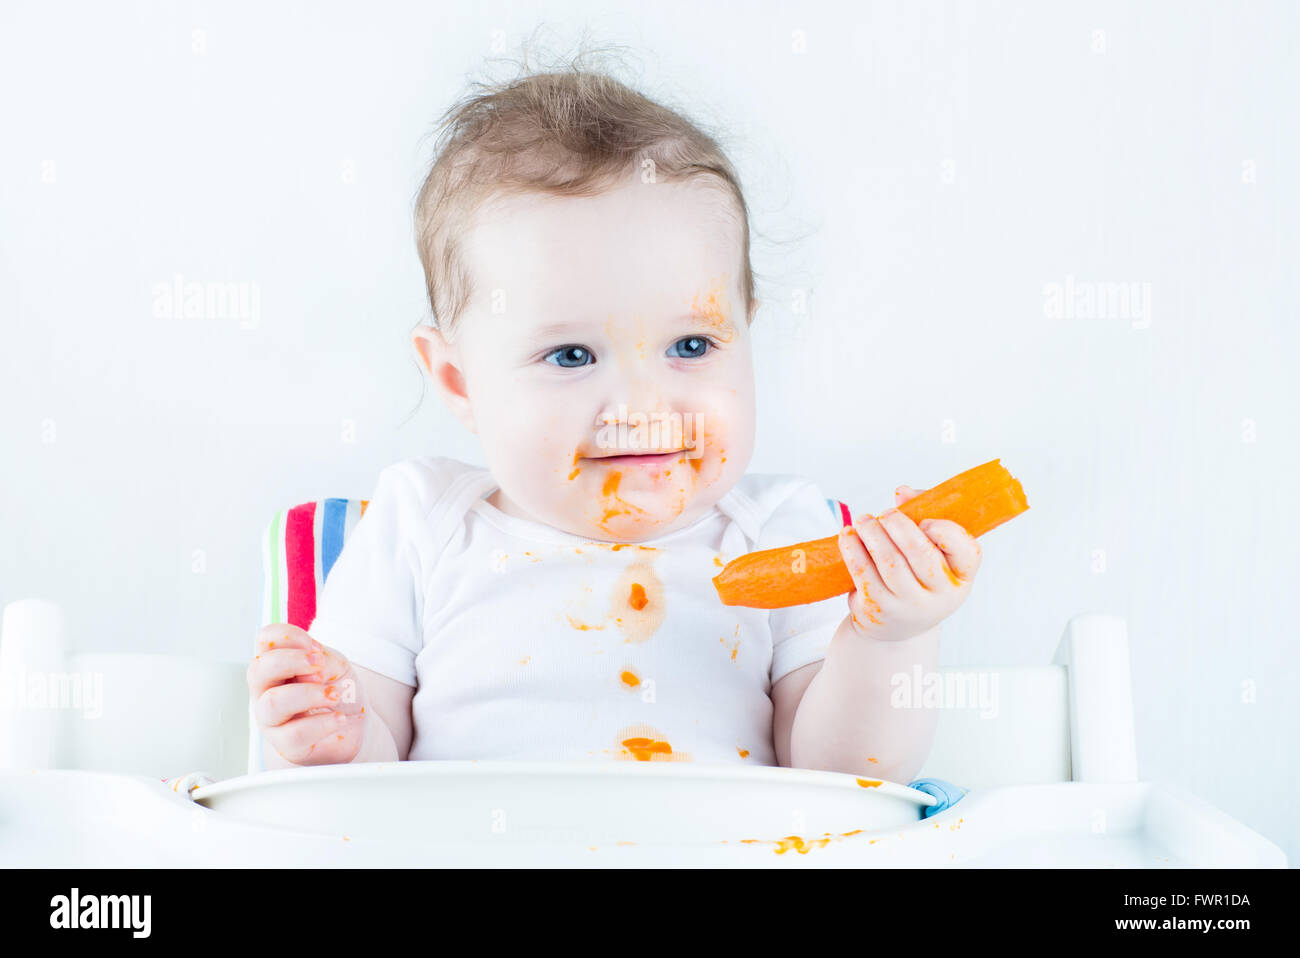 Funny laughing baby girl eating a carrot trying her first solid vegetable food sitting in a white high chair, isolated on white Stock Photo